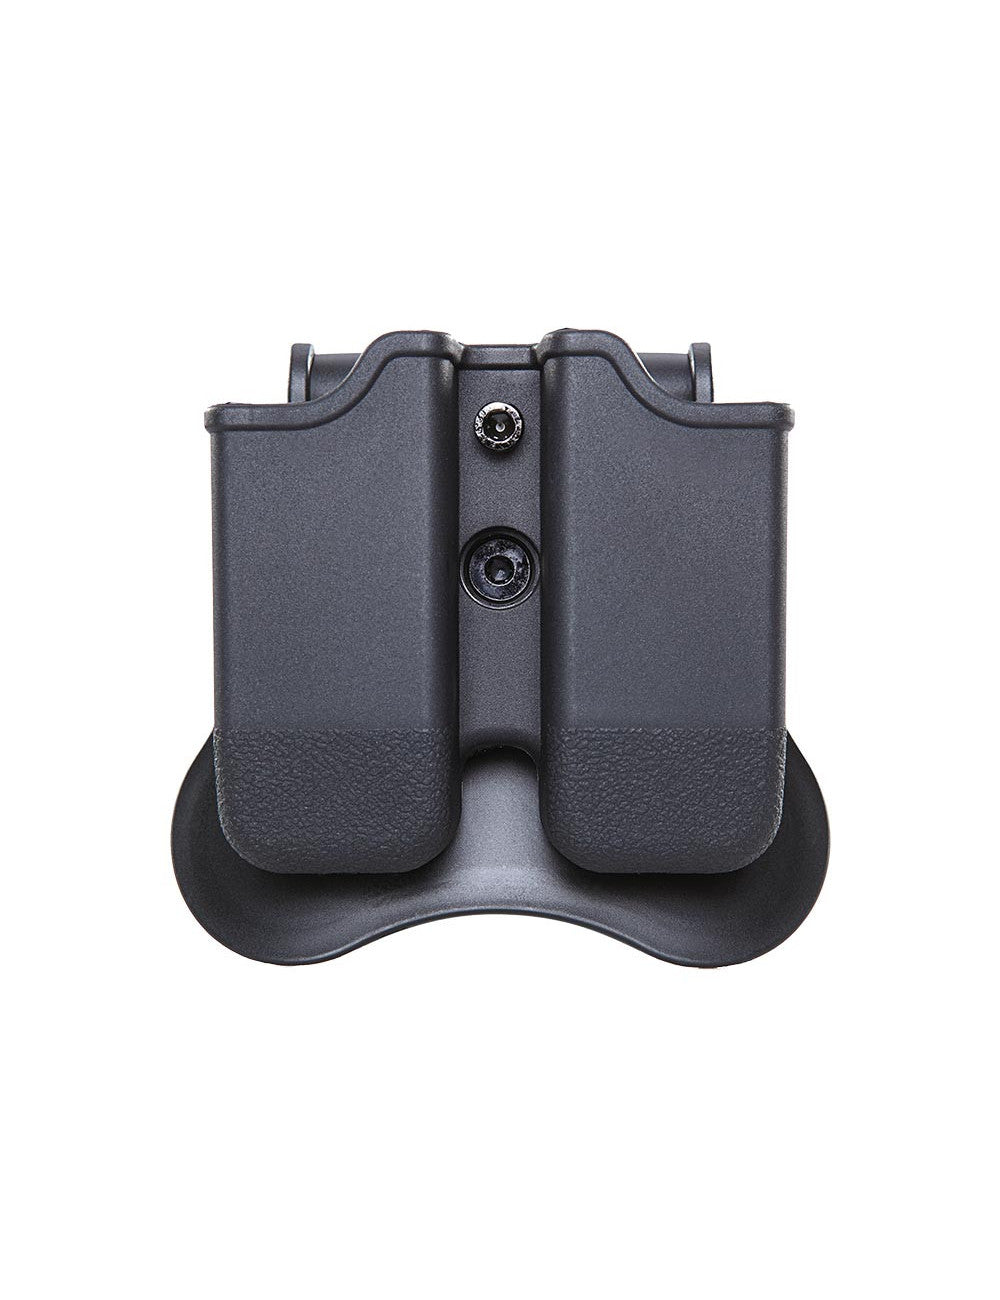 Amomax CY-AM-MP-G3 Tactical Double Magazine Pouch